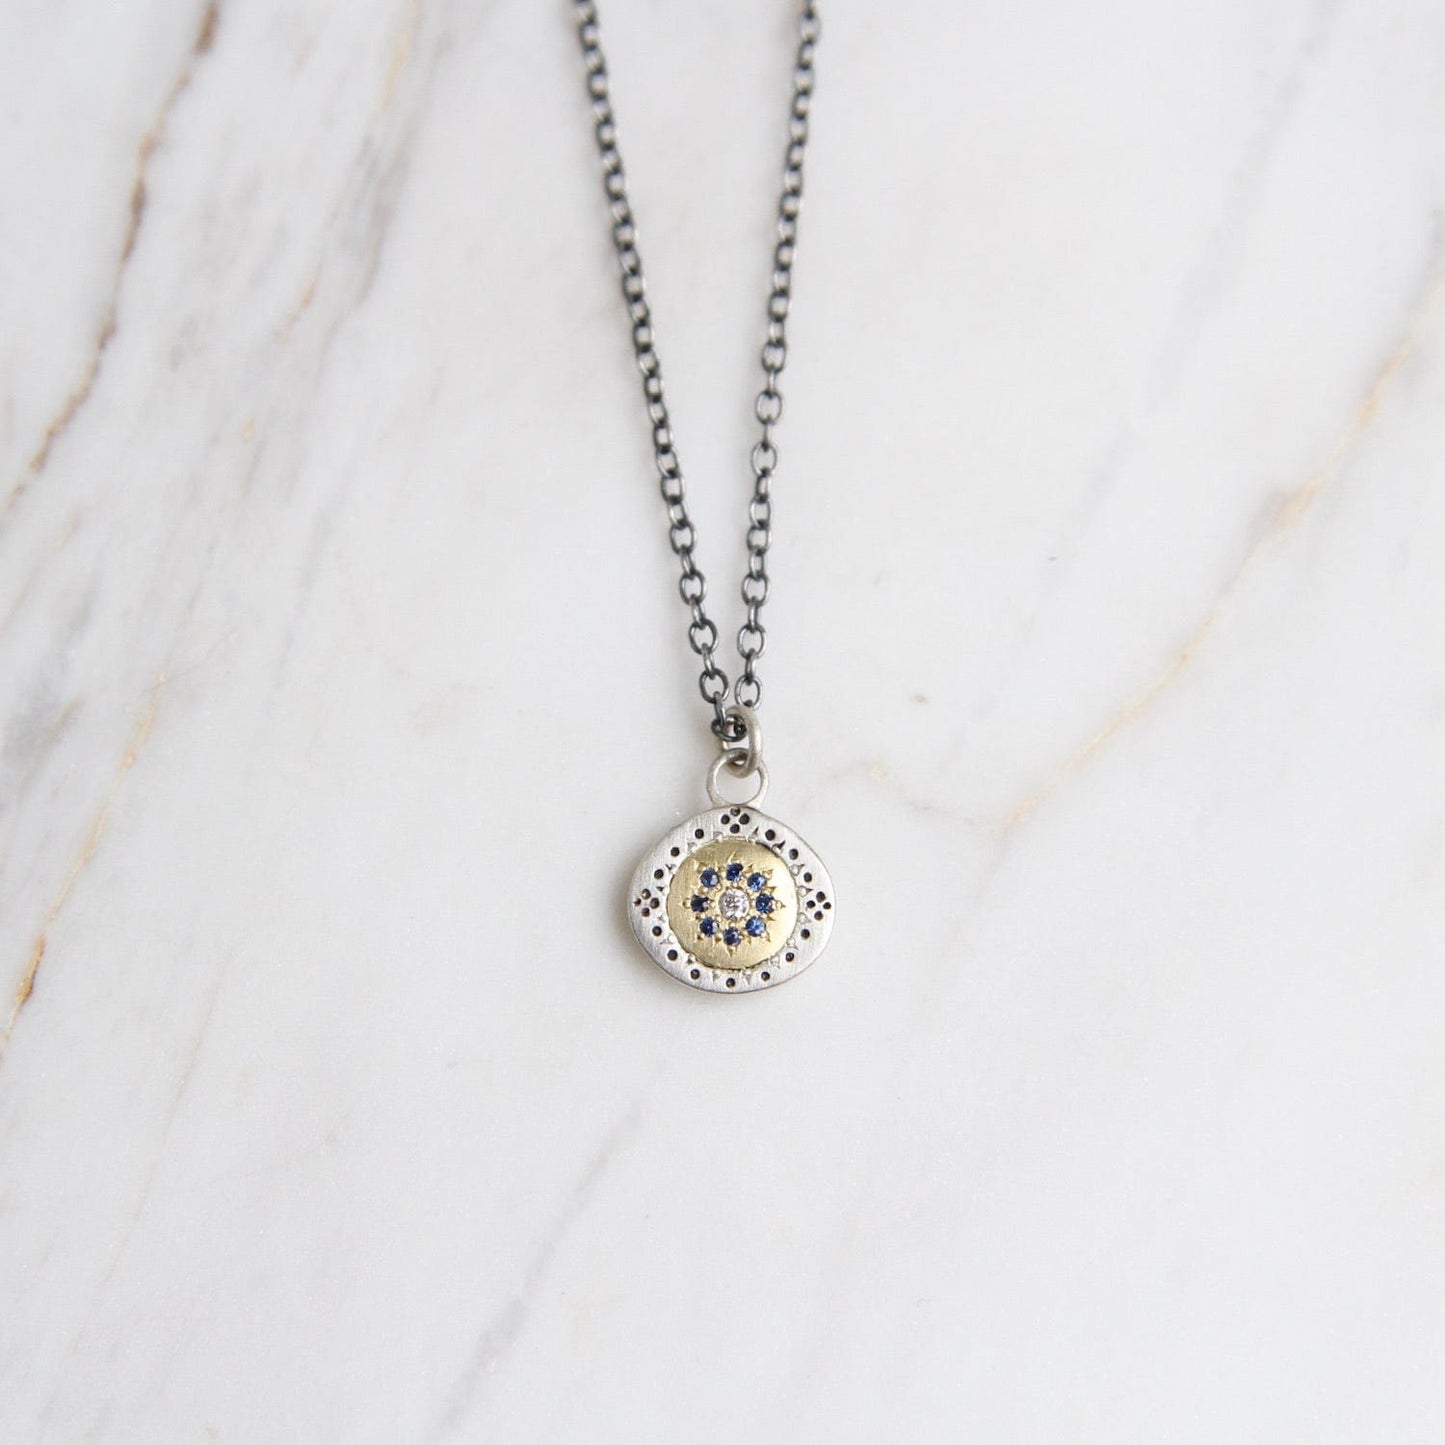 NKL Seeds of Harmony Charm with Sapphire Floret